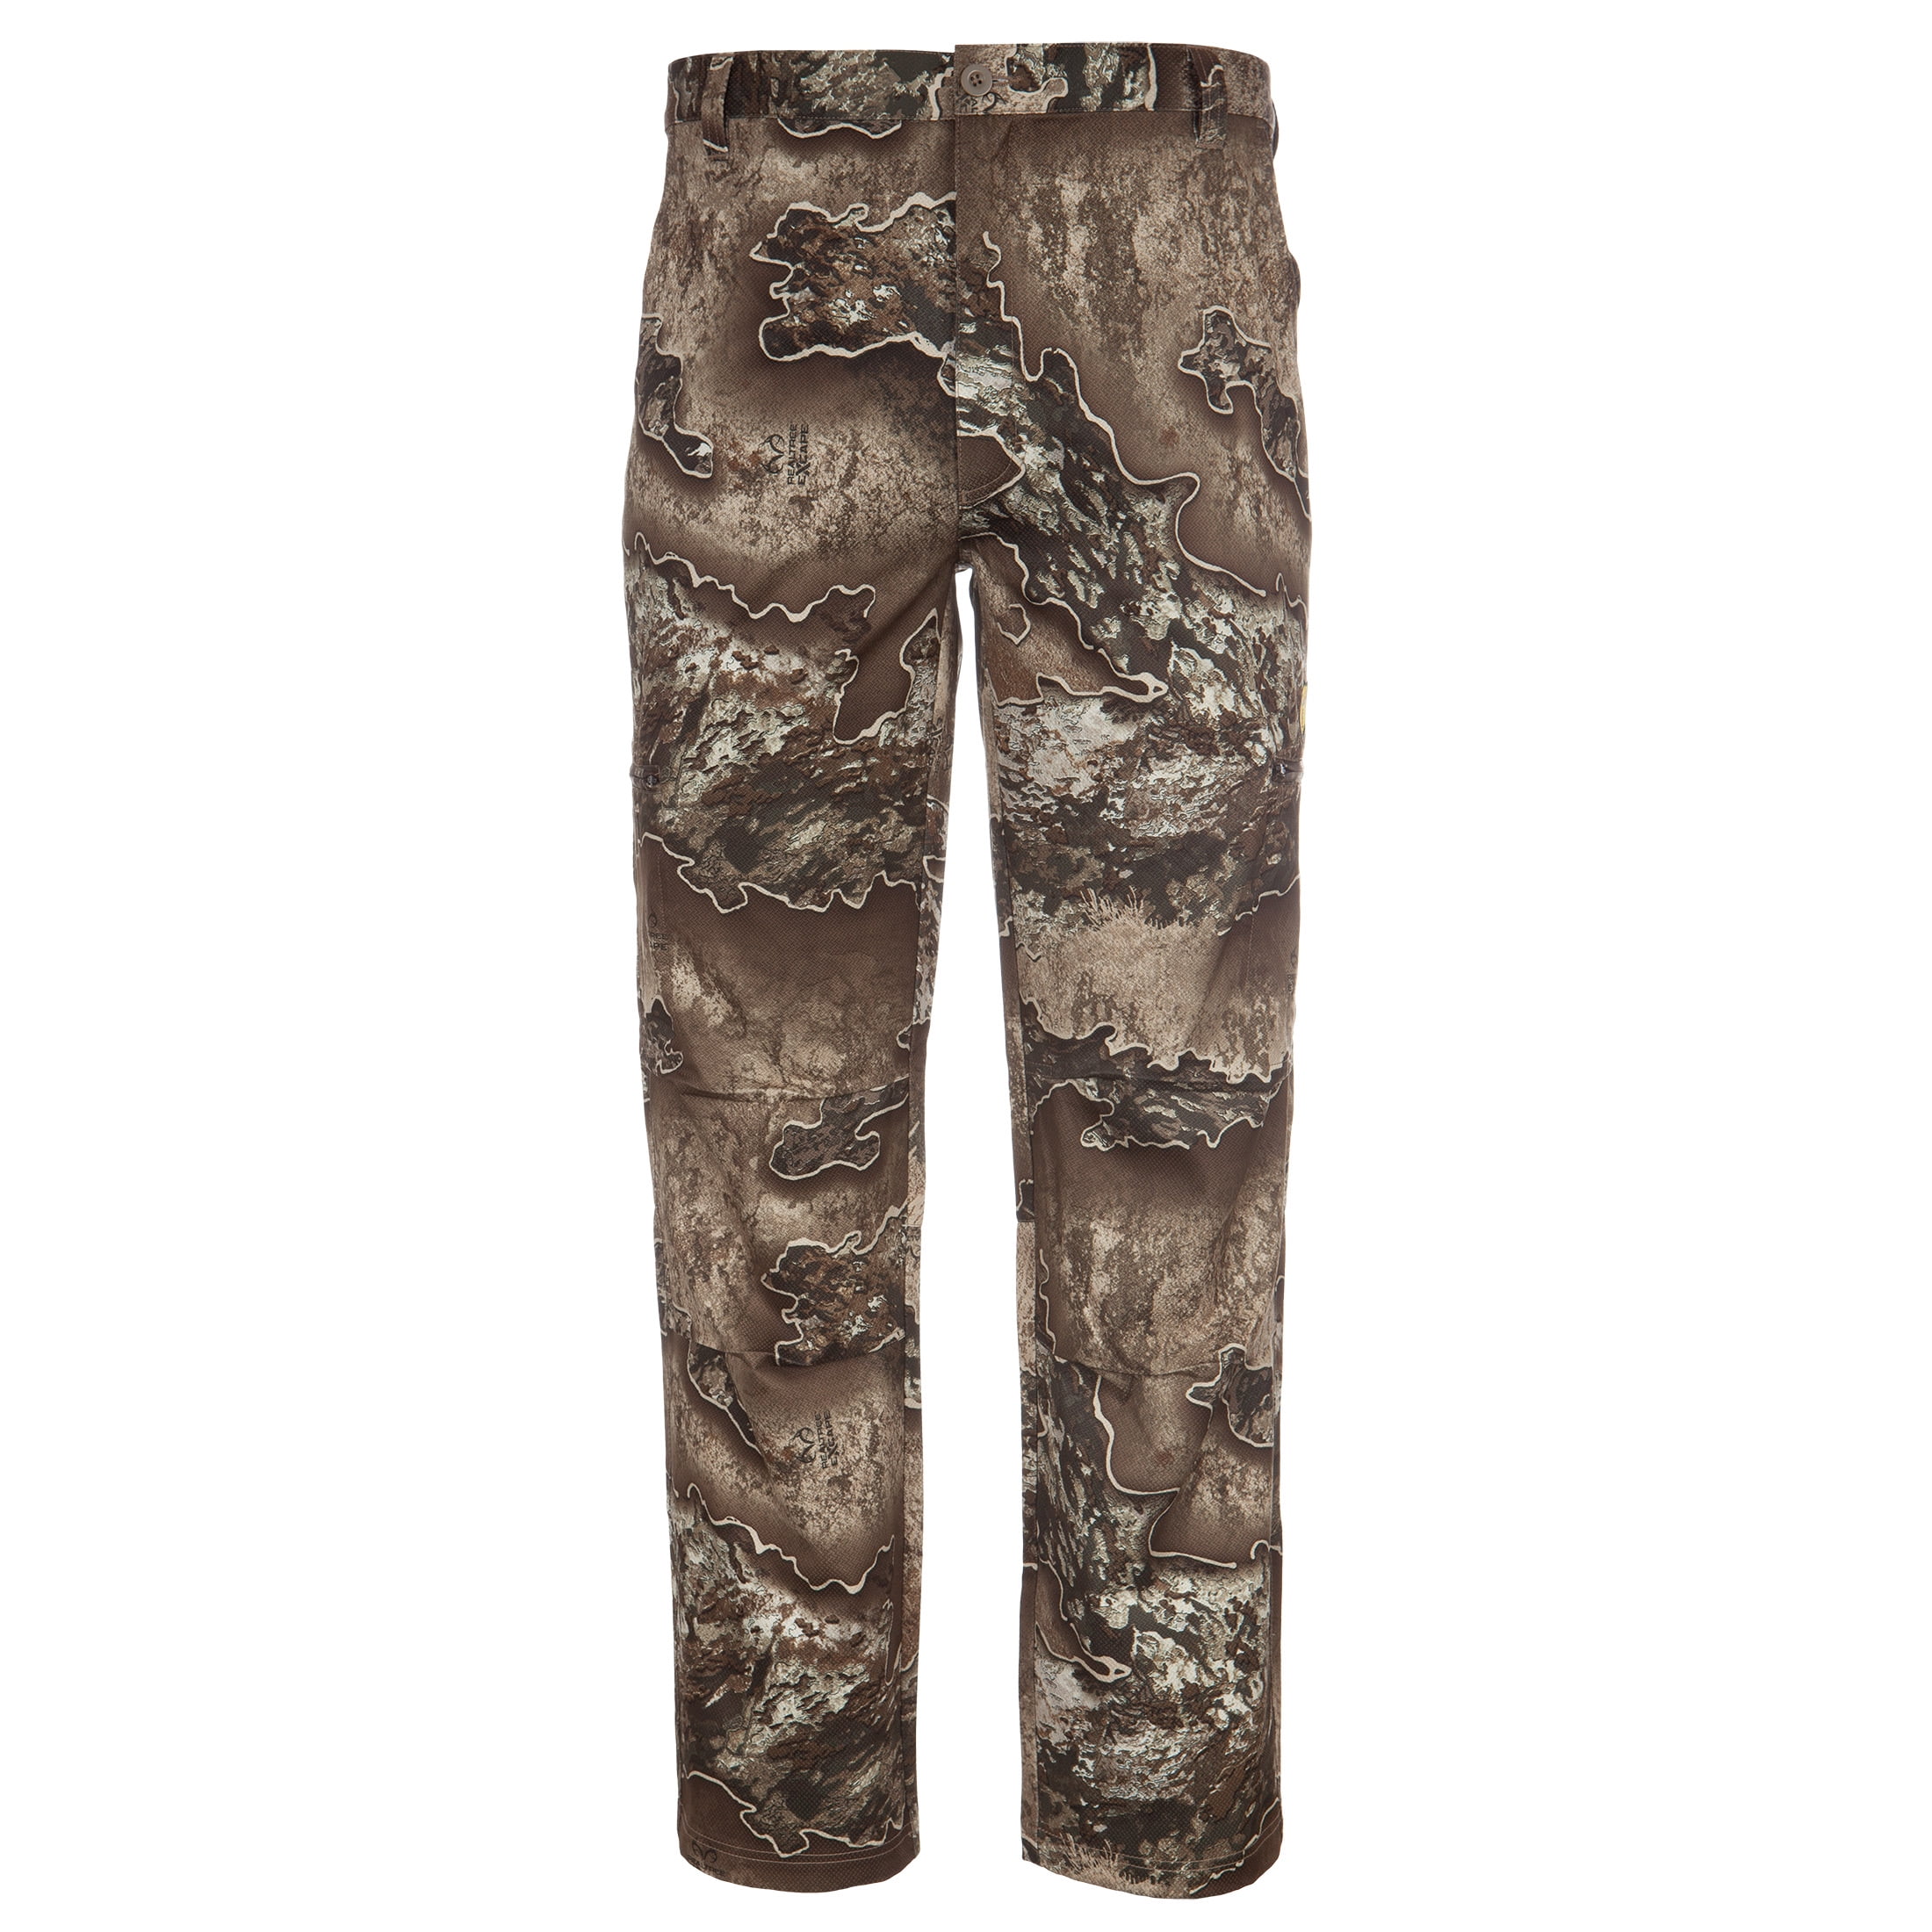 Field & StreamRealtree Camouflage Ripstop Men Cargo Pants New! Size: Large 